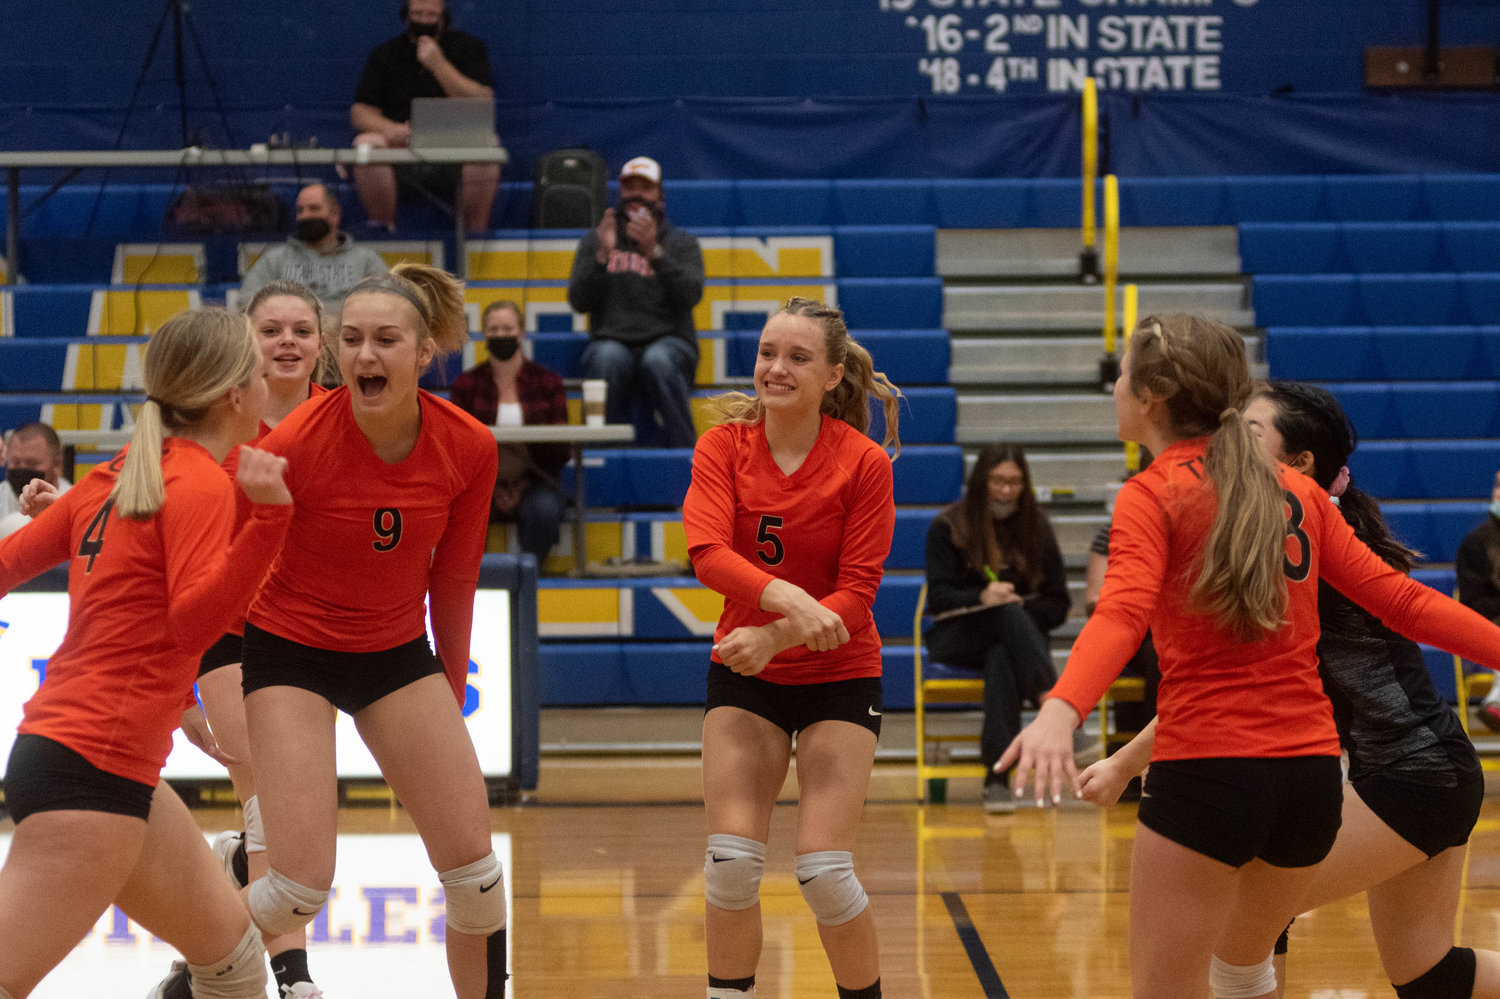 Napavine celebrates a point in its four set loss to Ocosta in the opening round of the District 4 Tournament in Adna Oct. 30.